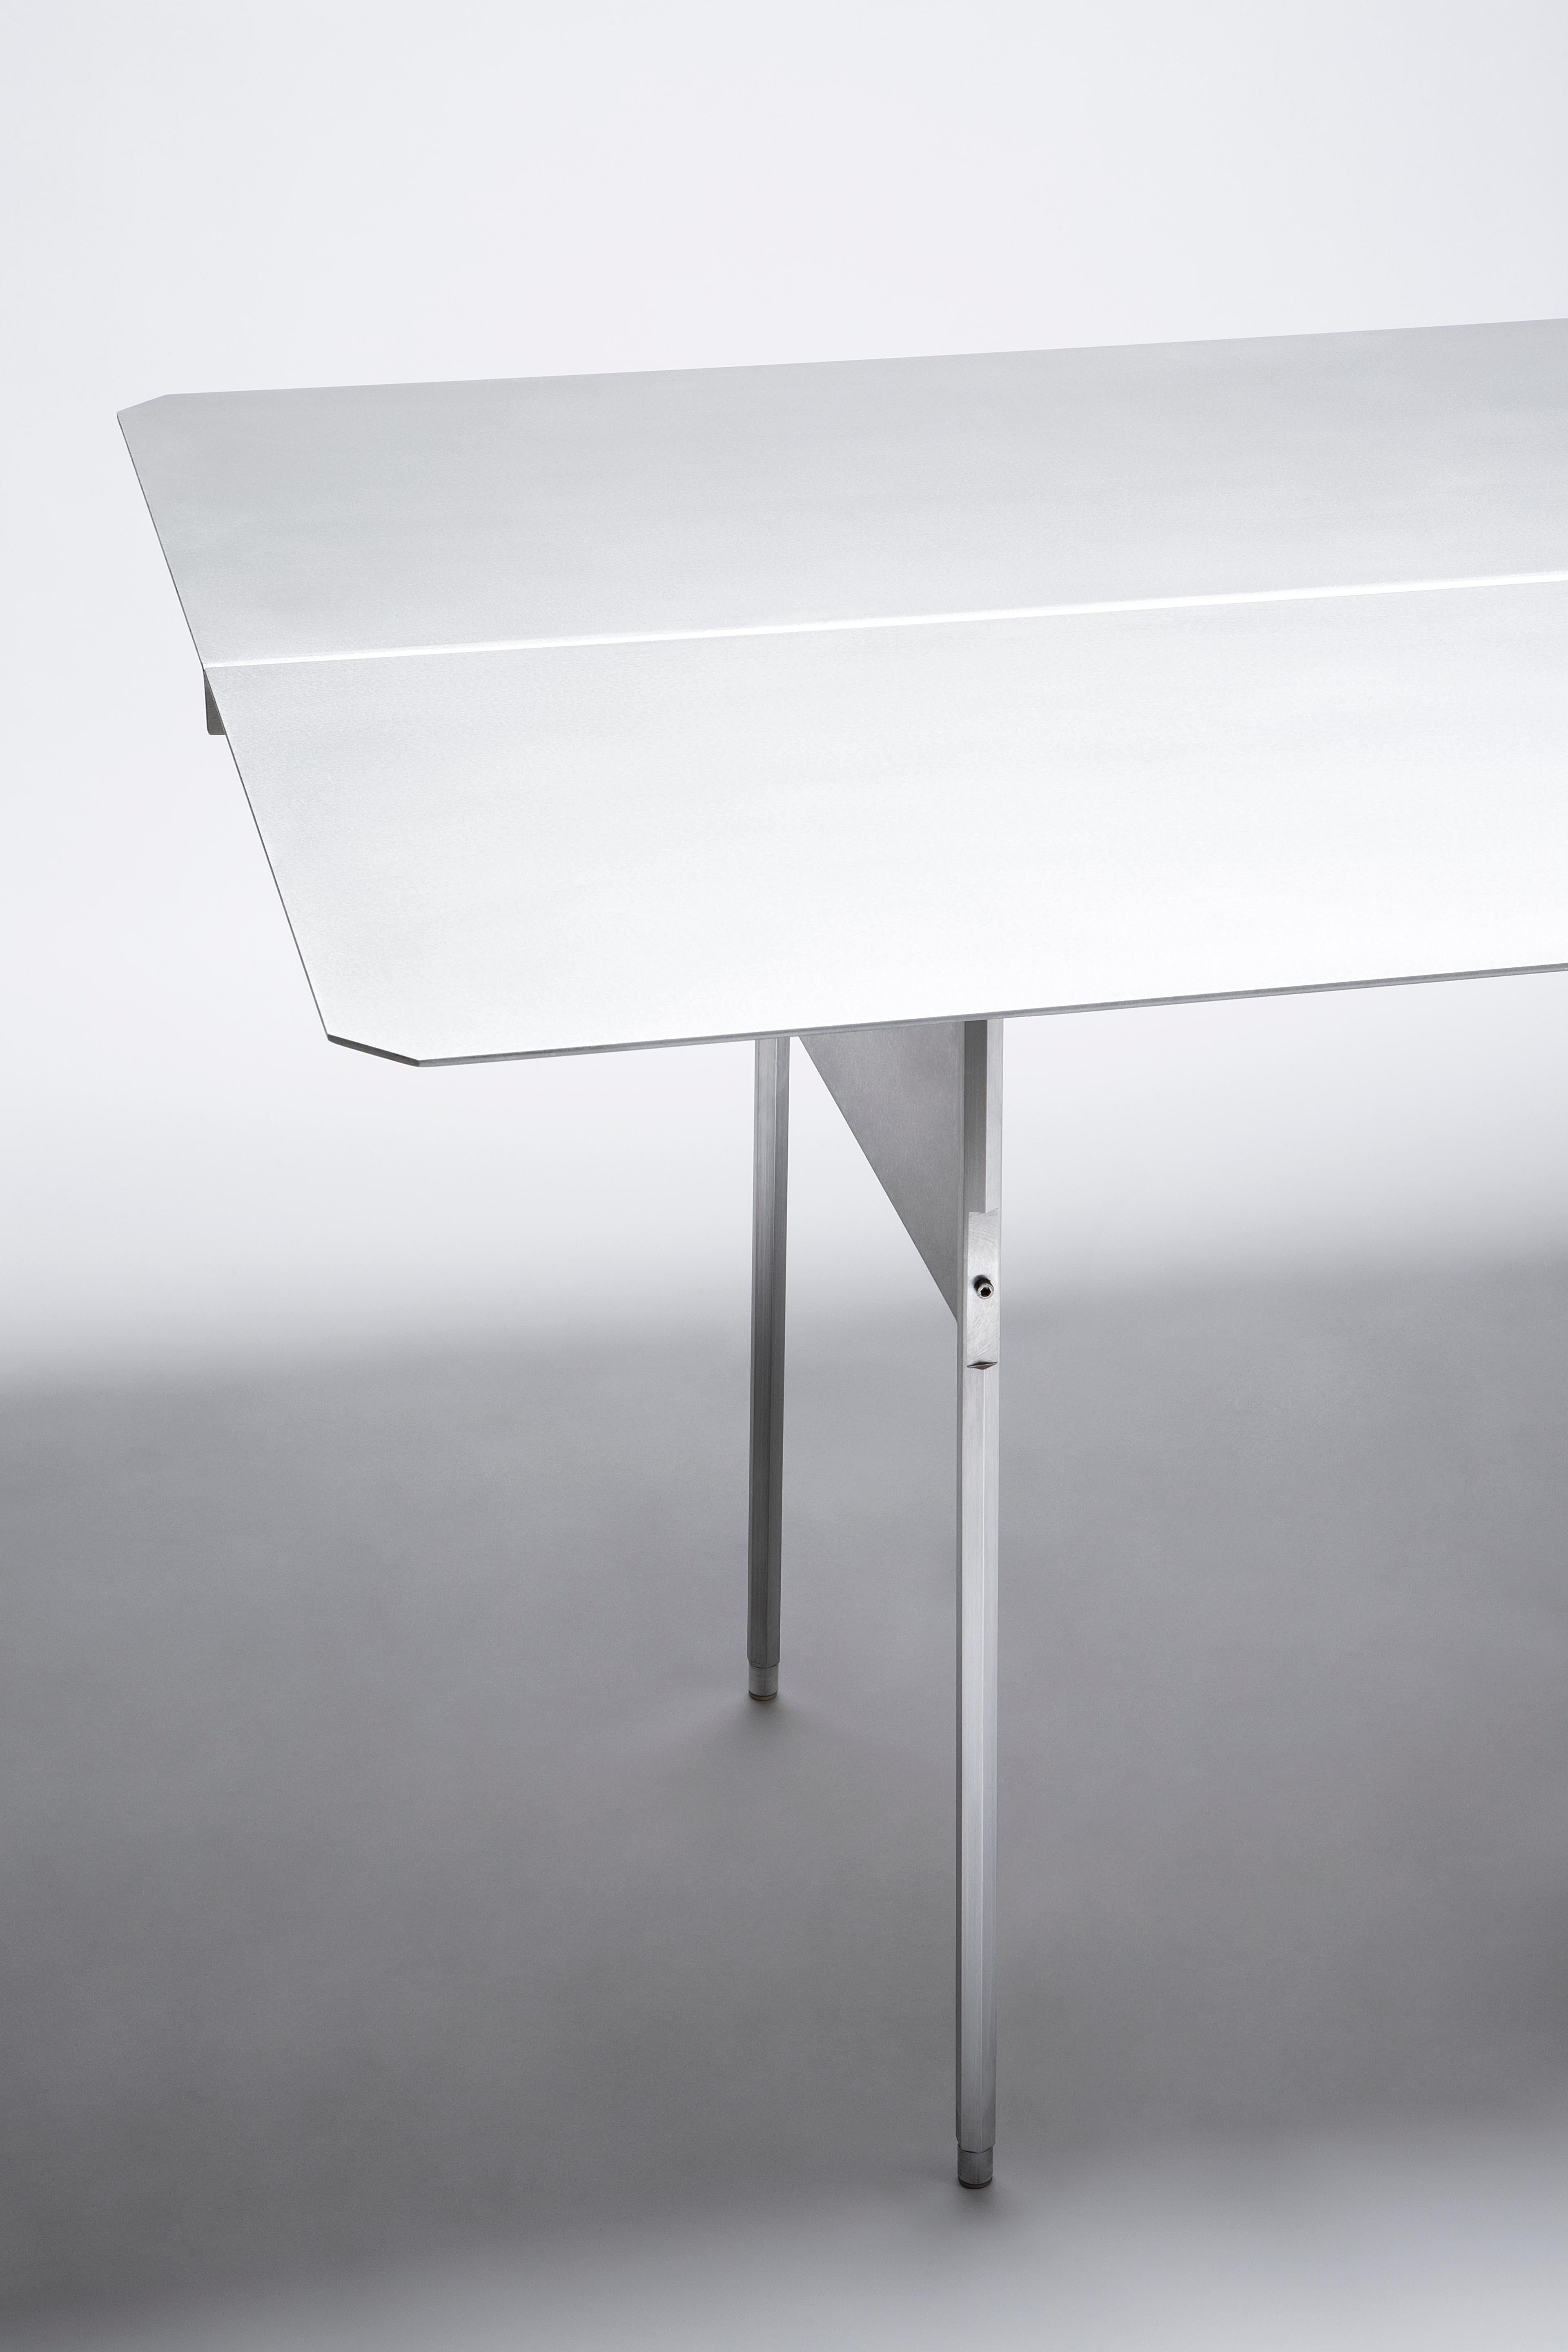 European Carbonari Table by Scattered Disc Objects and Stefano Marongiu For Sale